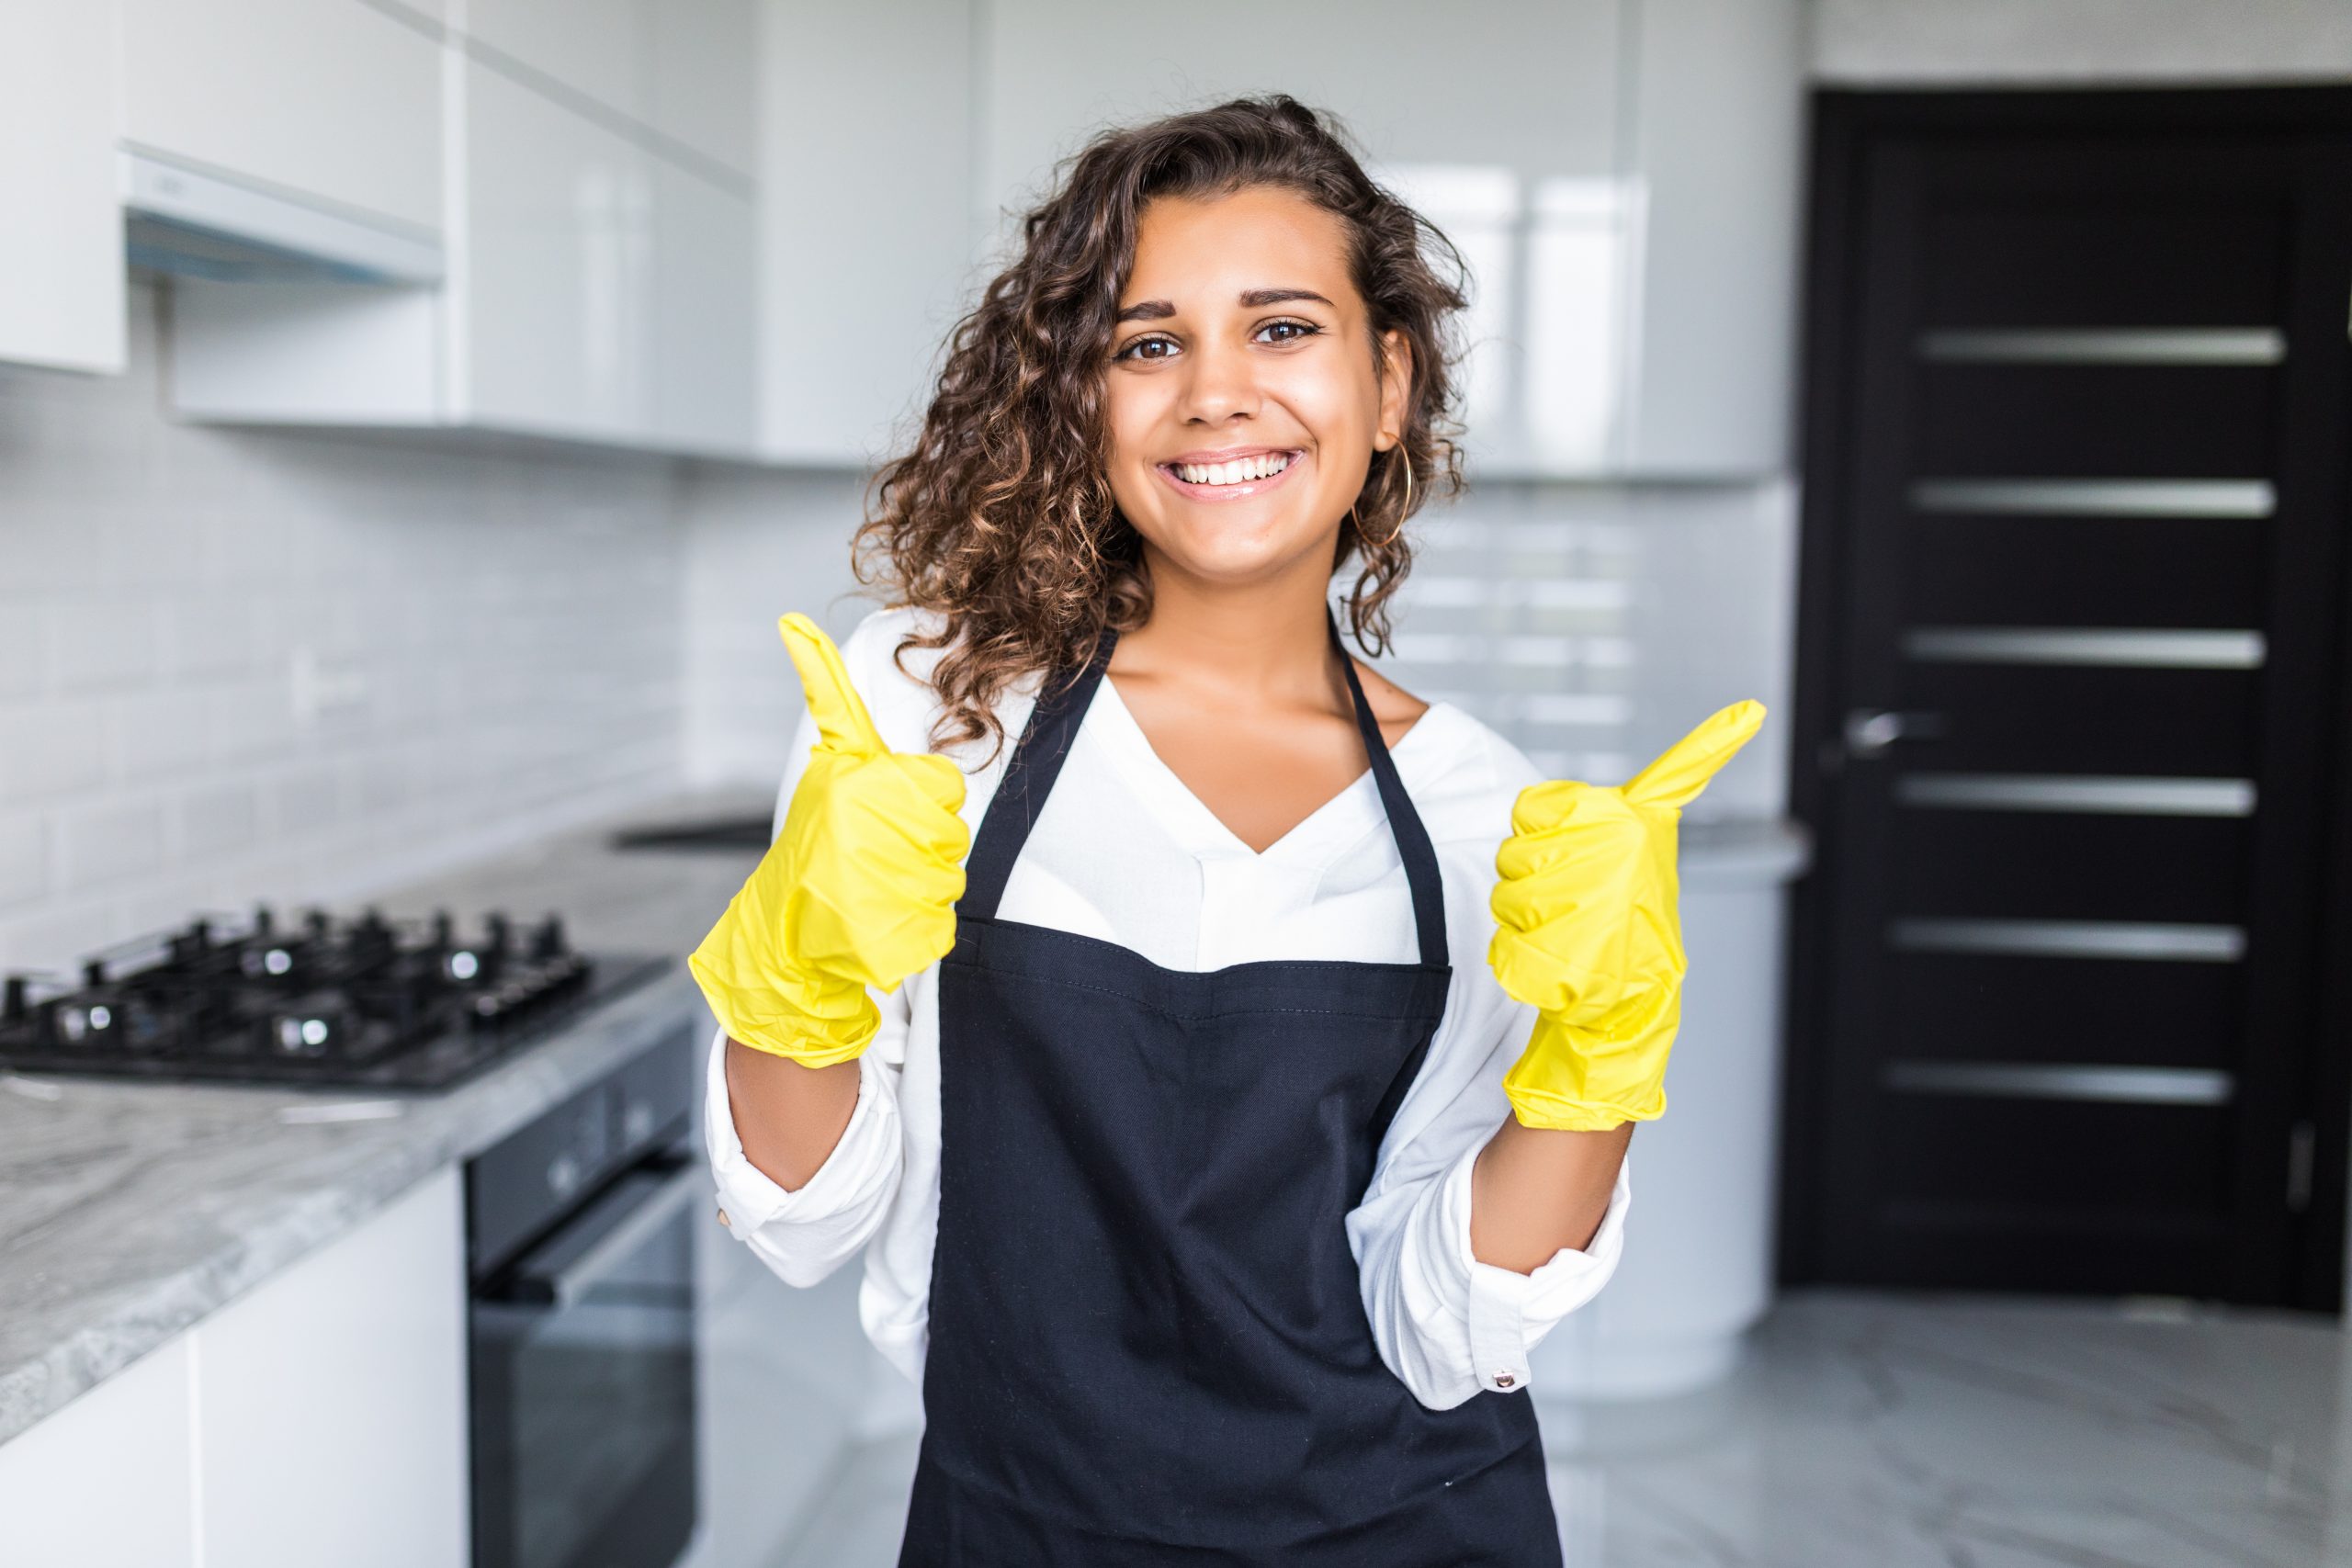 General cleaning, maintenance cleaning. What is the main difference?